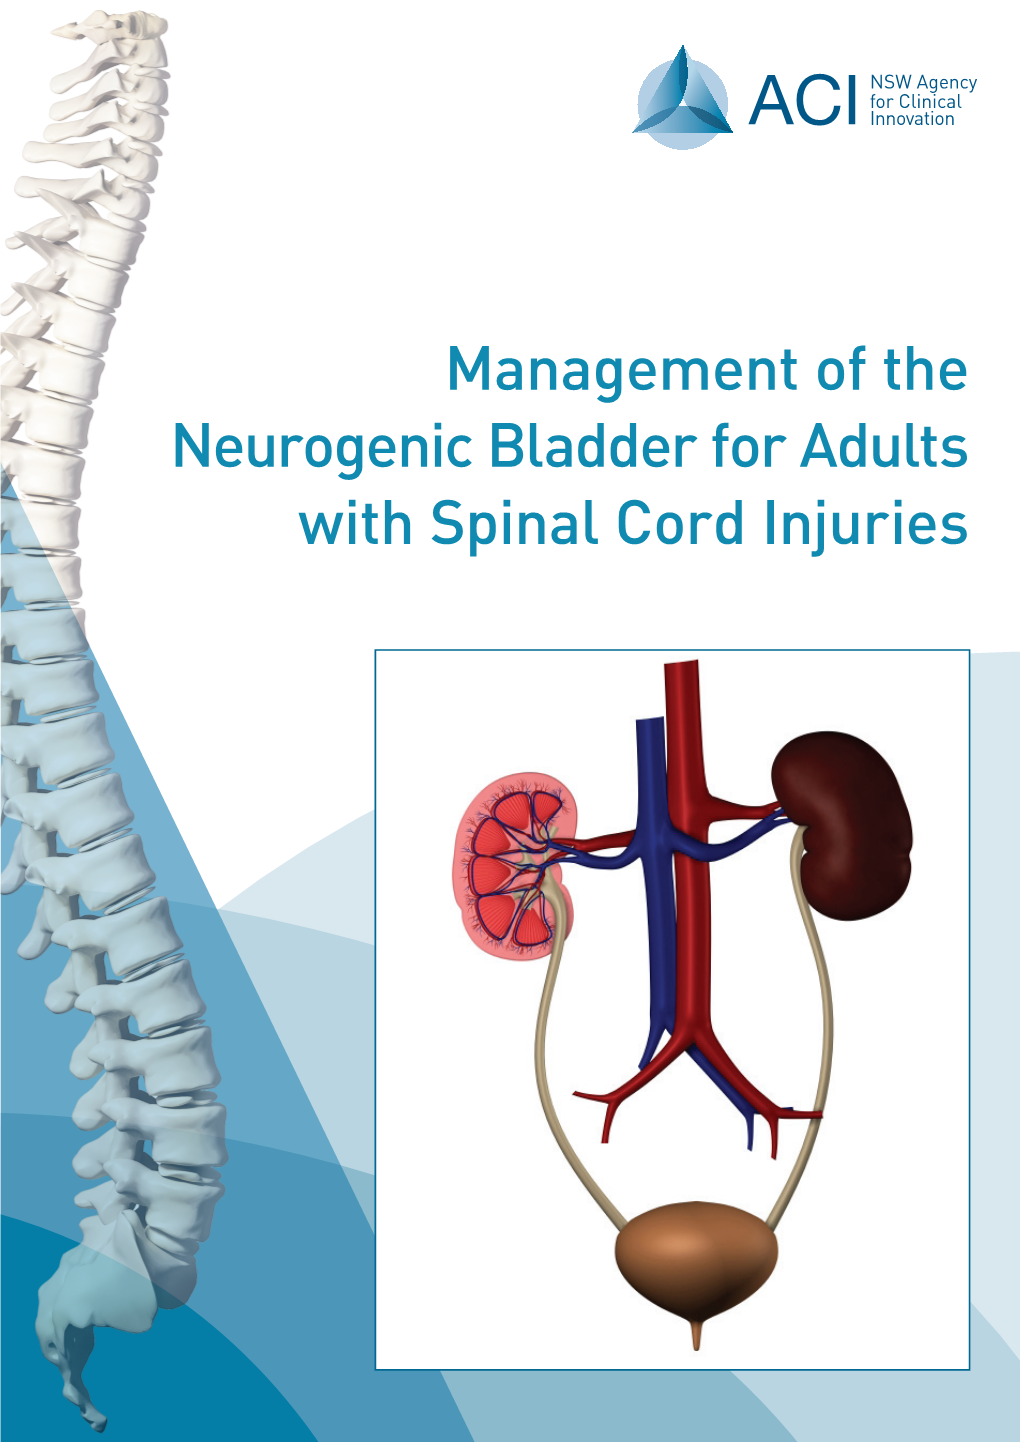 Management of the Neurogenic Bladder for Adults with Spinal Cord